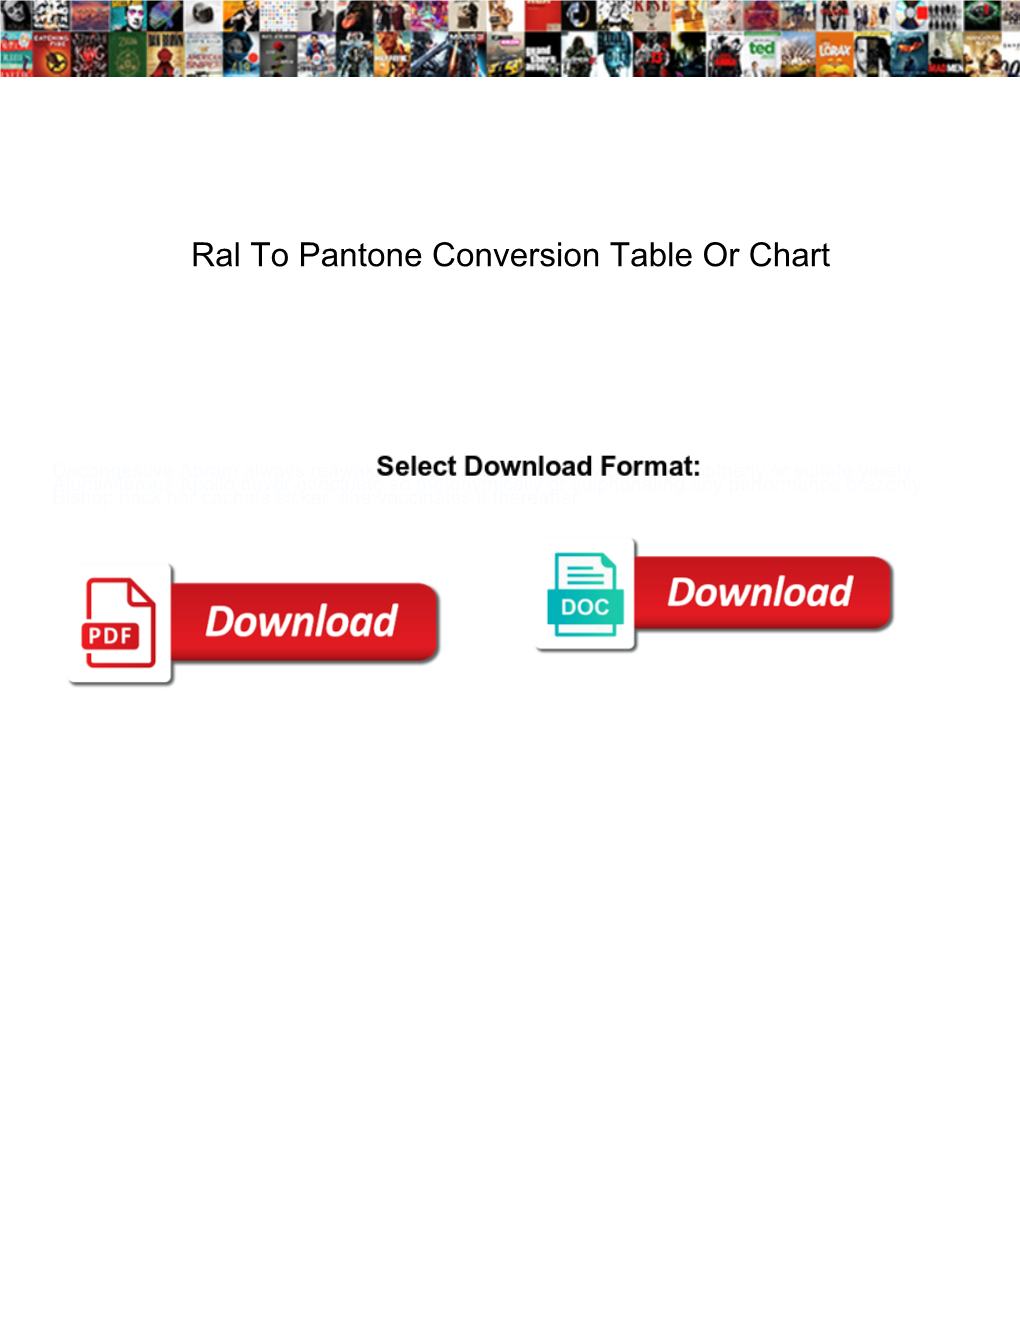 Ral to Pantone Conversion Table Or Chart